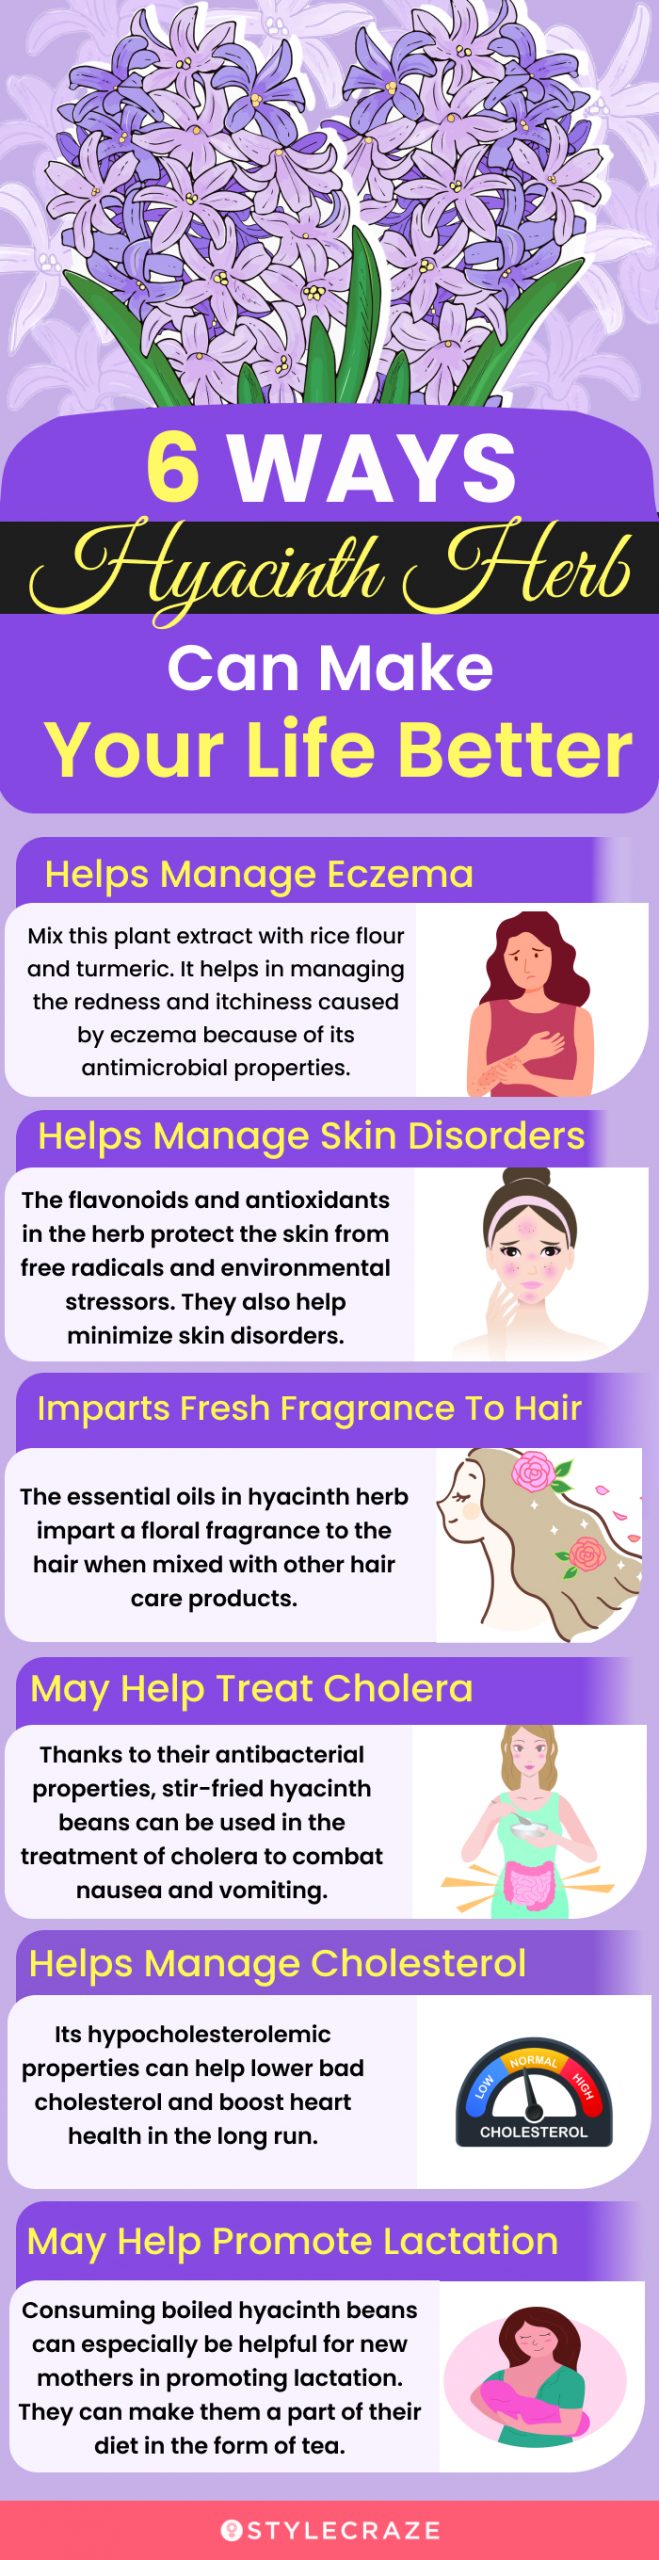 6 ways hyacinth herb can make your life better (infographic)